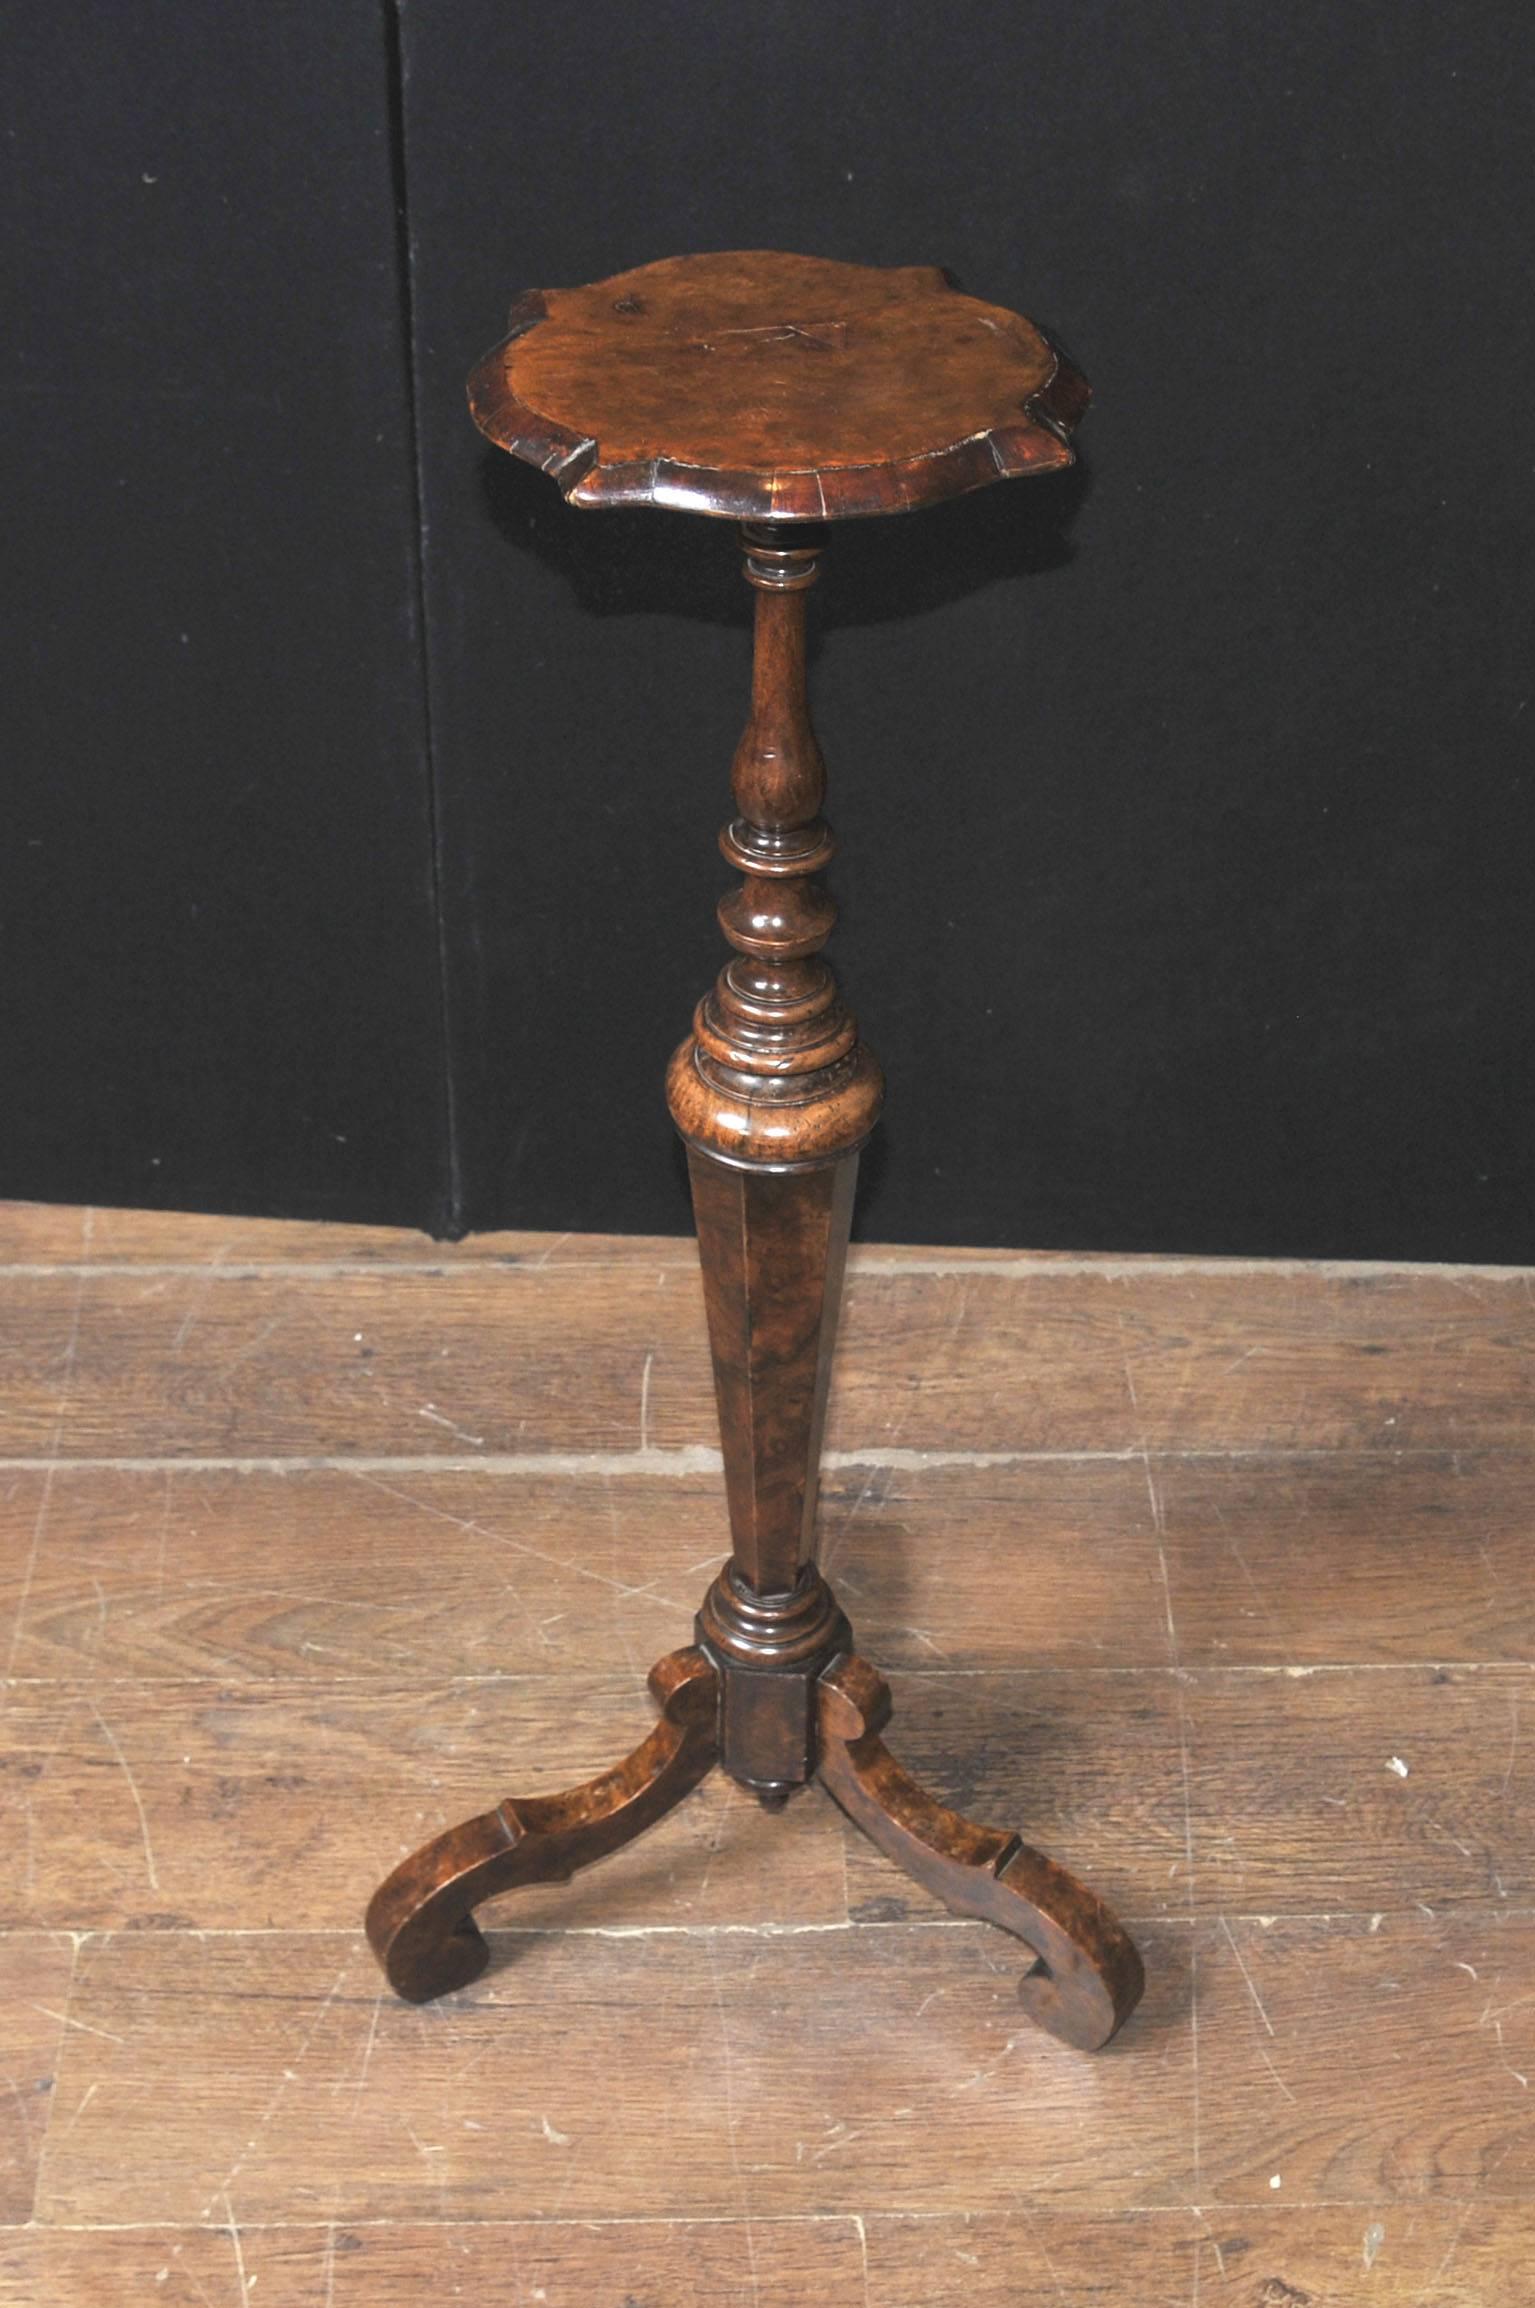 Gorgeous antique William and Mary pedestal stand in walnut.
Love the elegant shape and design to this collectors piece.
Great piece for displaying a bust or vase on.
We date this antique to, circa 1860.
Offered in great condition, ready for home